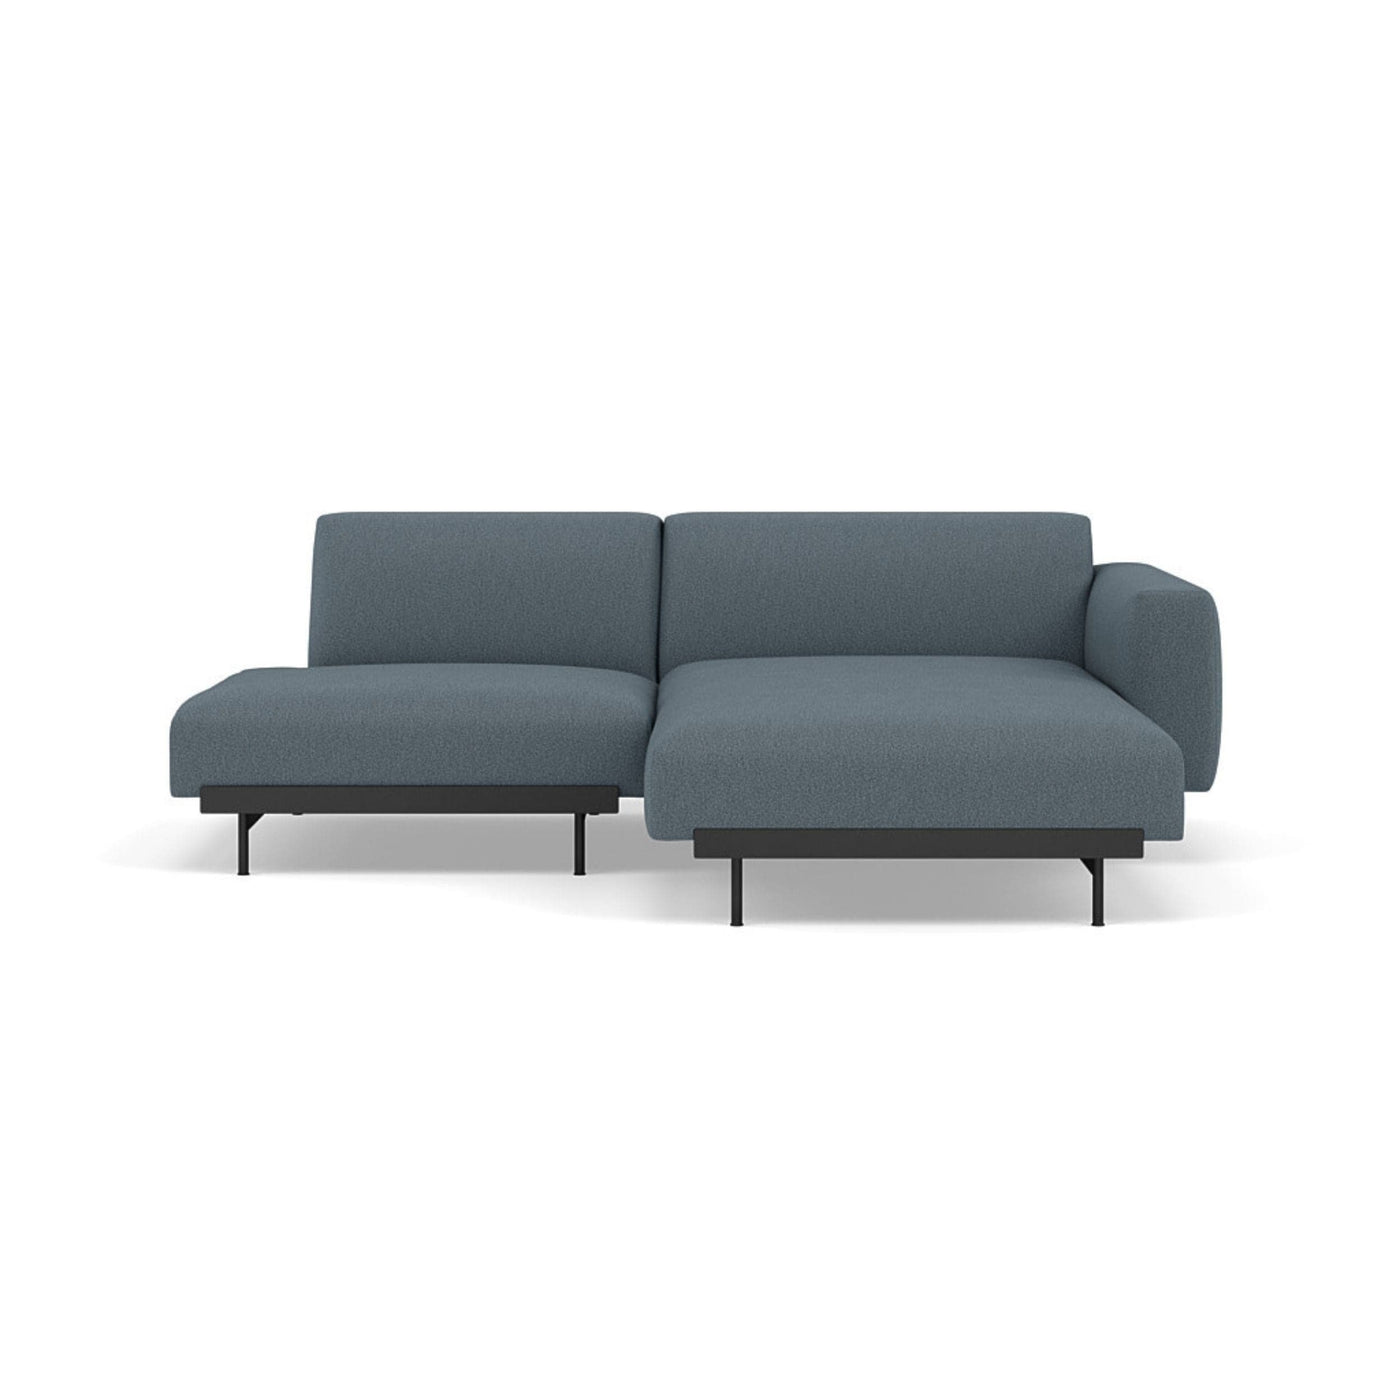 Muuto In Situ Modular 2 Seater Sofa, configuration 7 in clay 1 fabric. Made to order from someday designs #colour_clay-1-blue